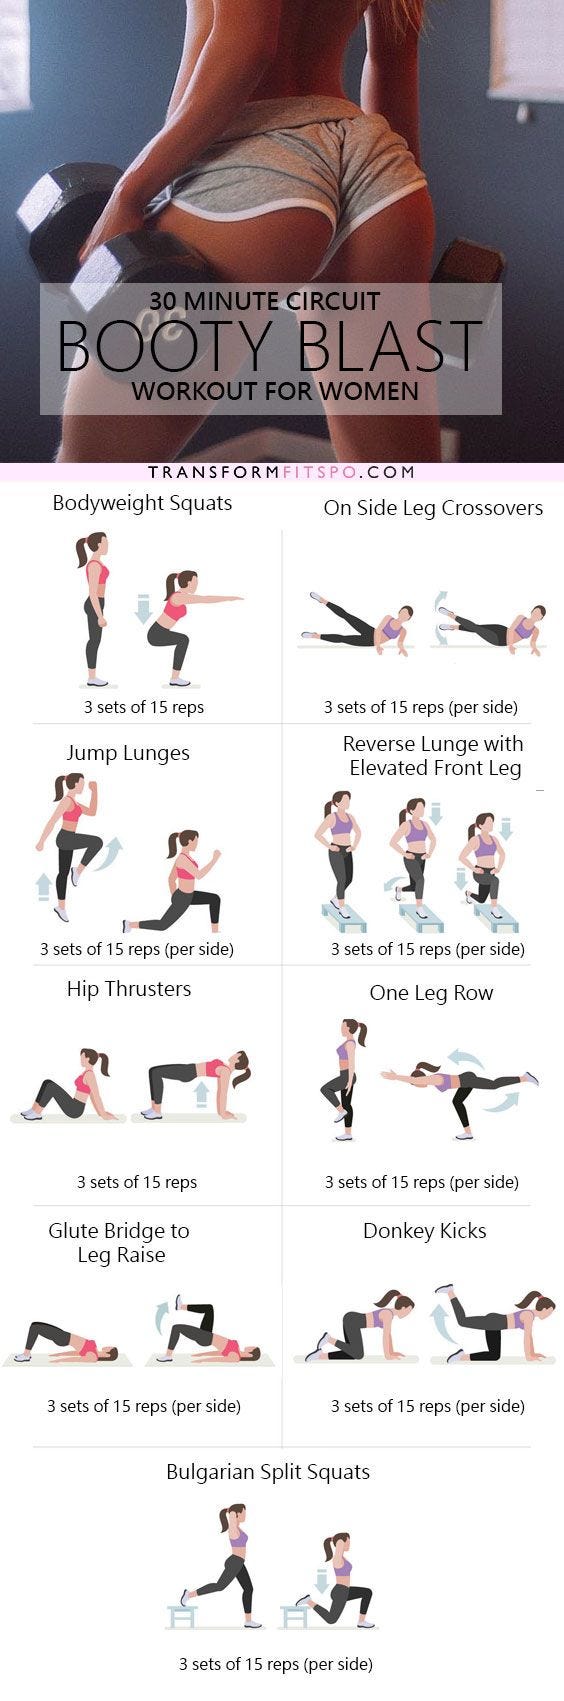 30 Minute Booty Blast Workout From Home for Women